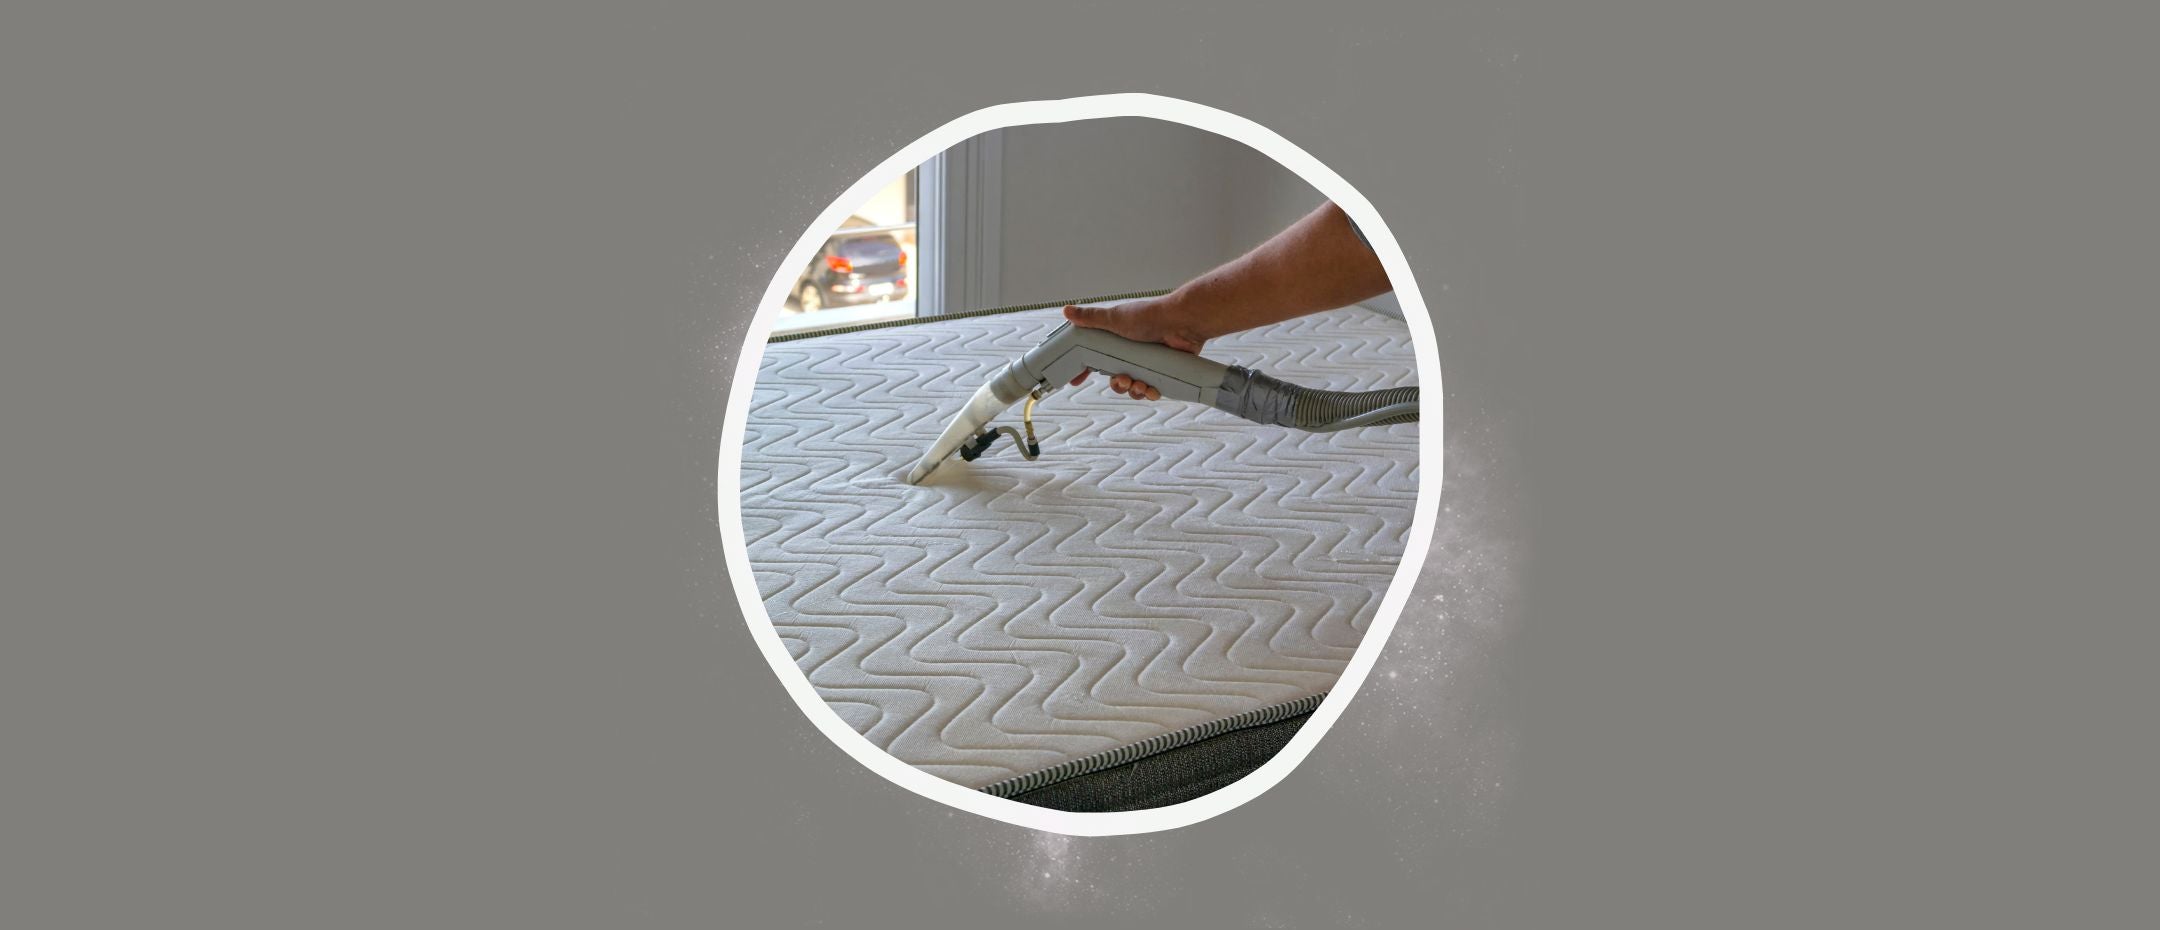 Hand vacuuming a mattress to dry it.